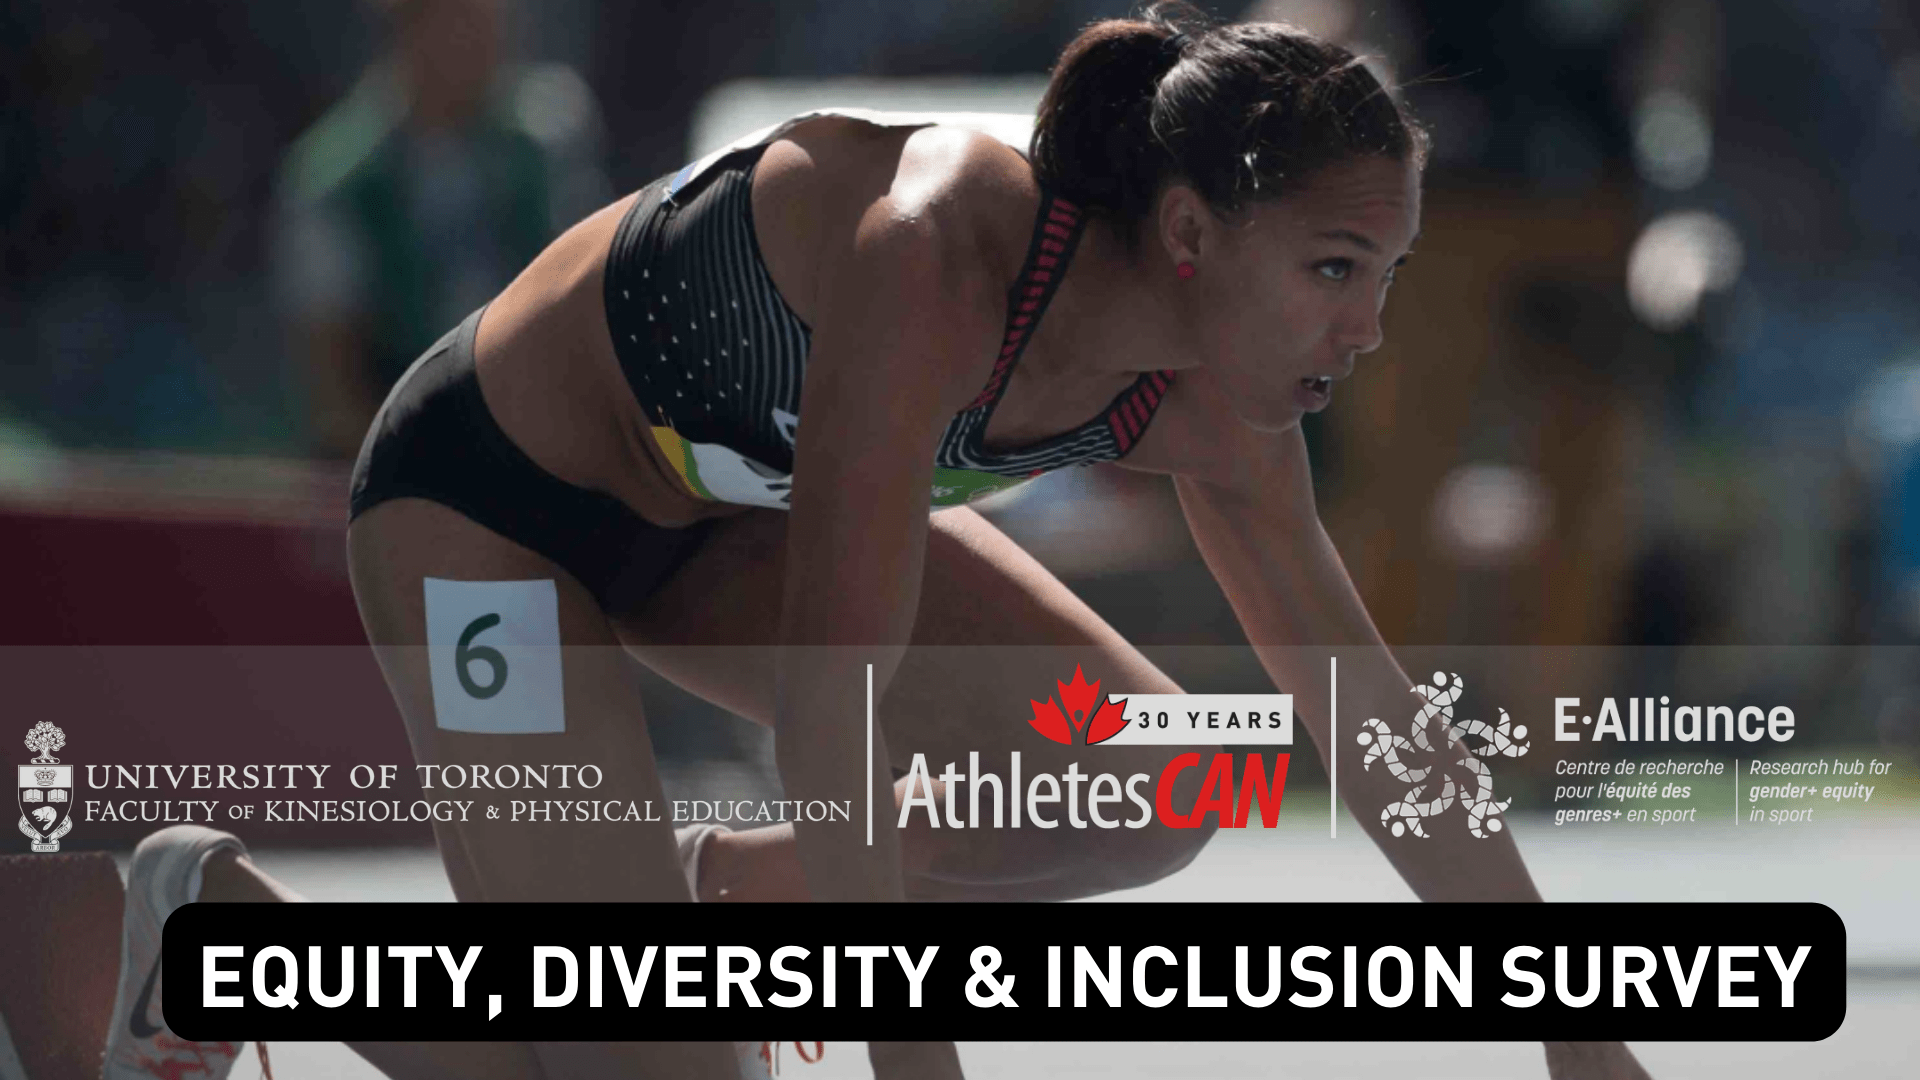 AthletesCAN to conduct landscape equity, diversity and inclusion survey of members in partnership with U of T and E-Alliance